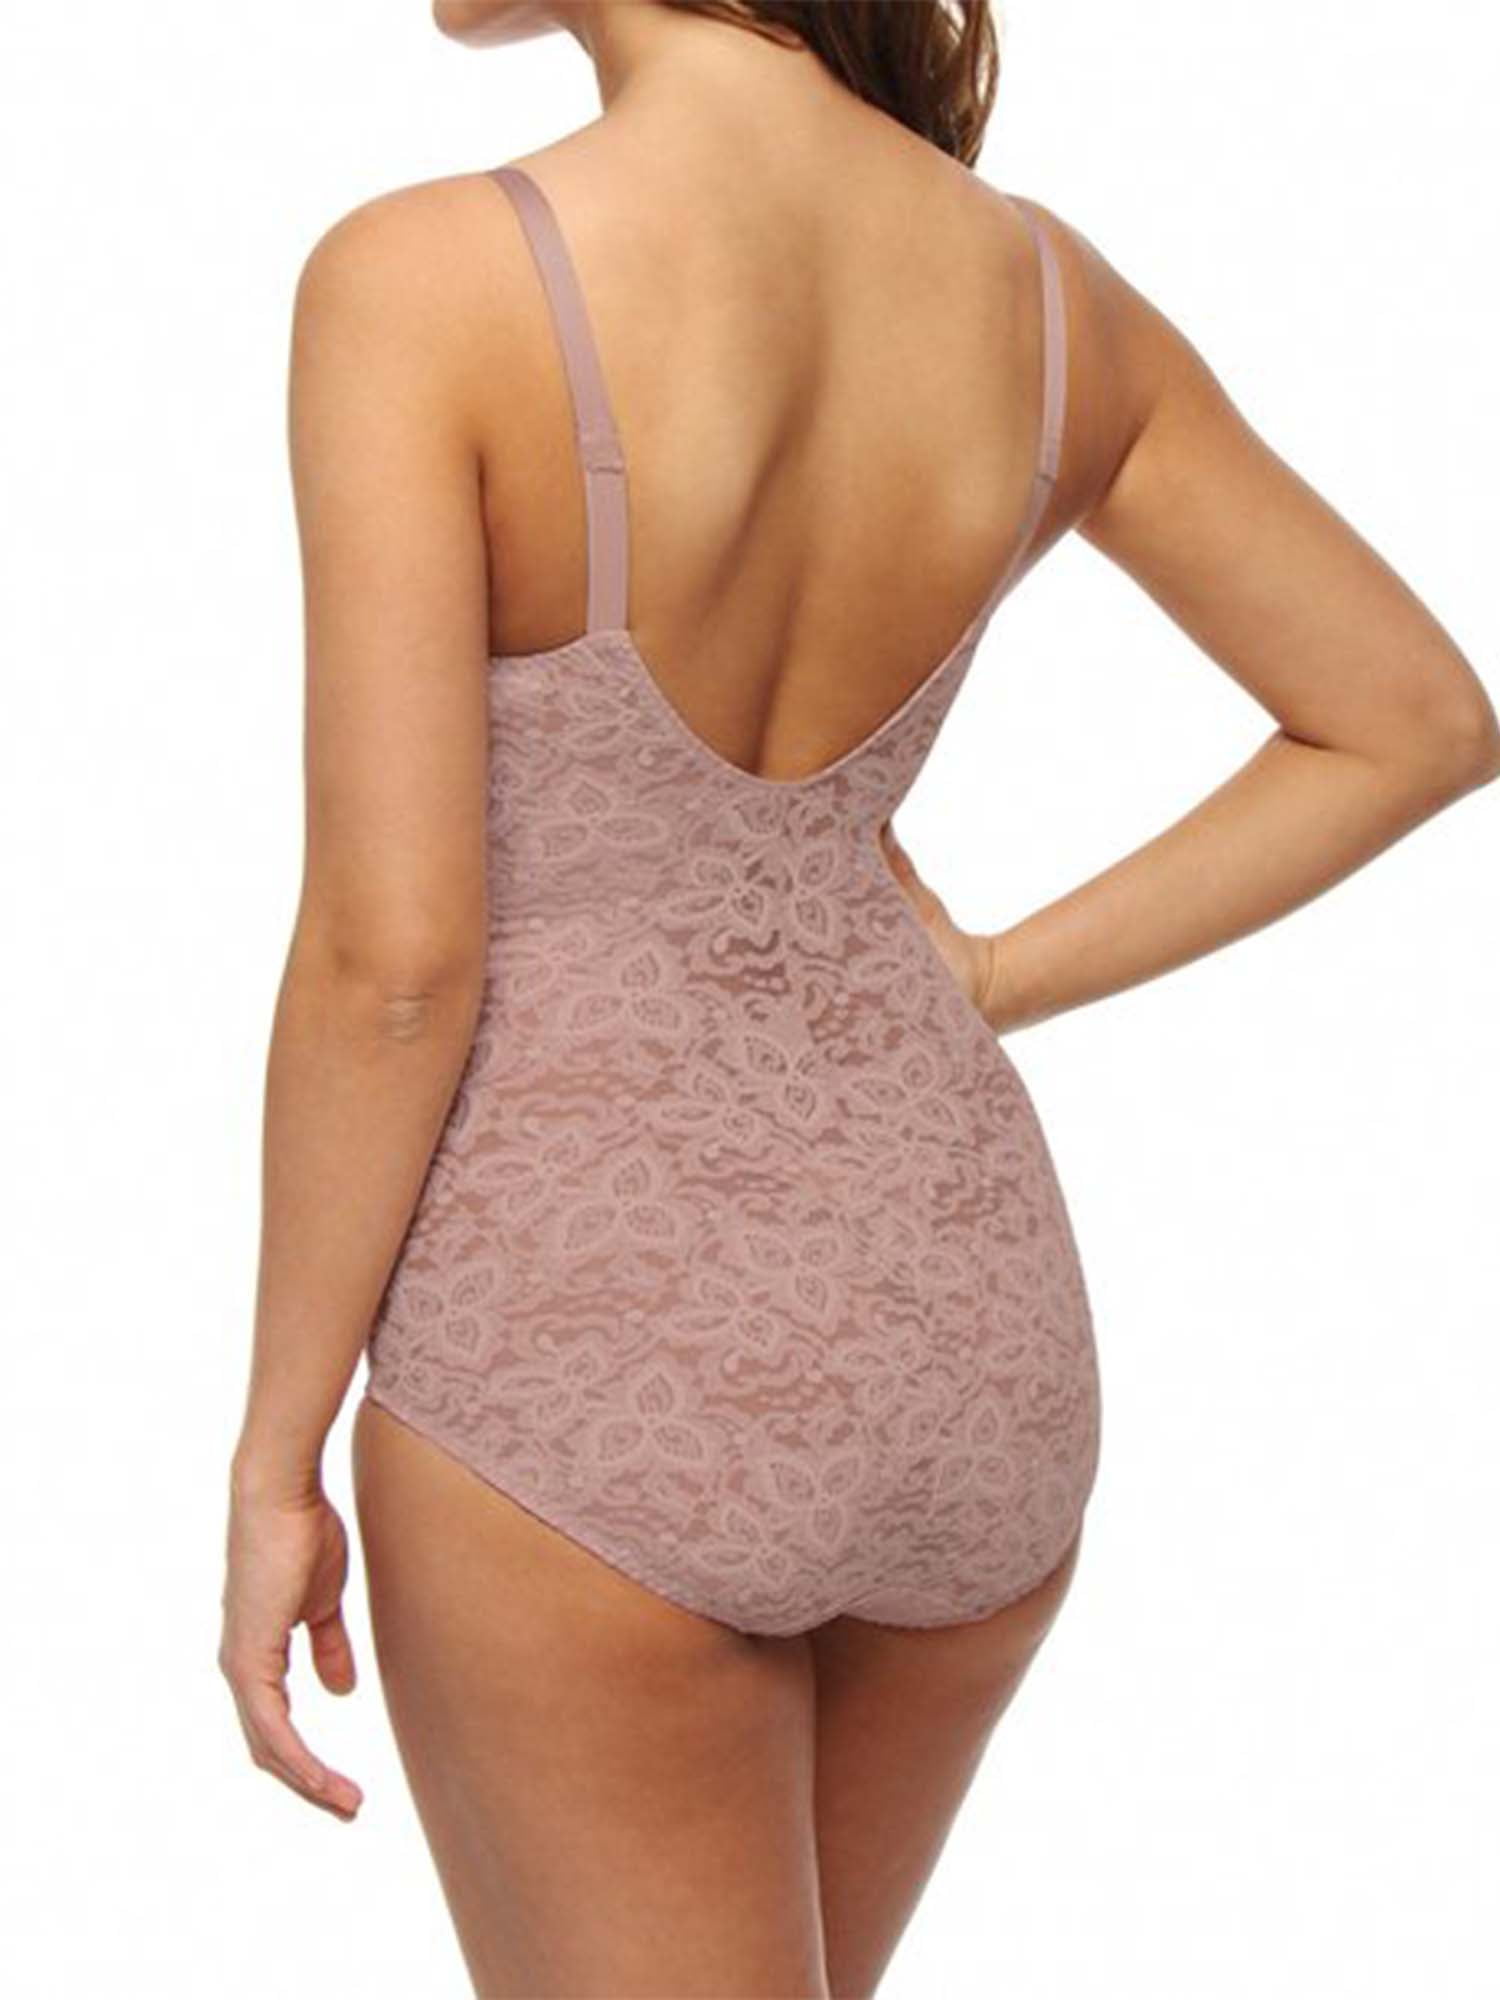 Bali Women's Shapewear Firm Control Lace 'N' Smooth Body Briefer